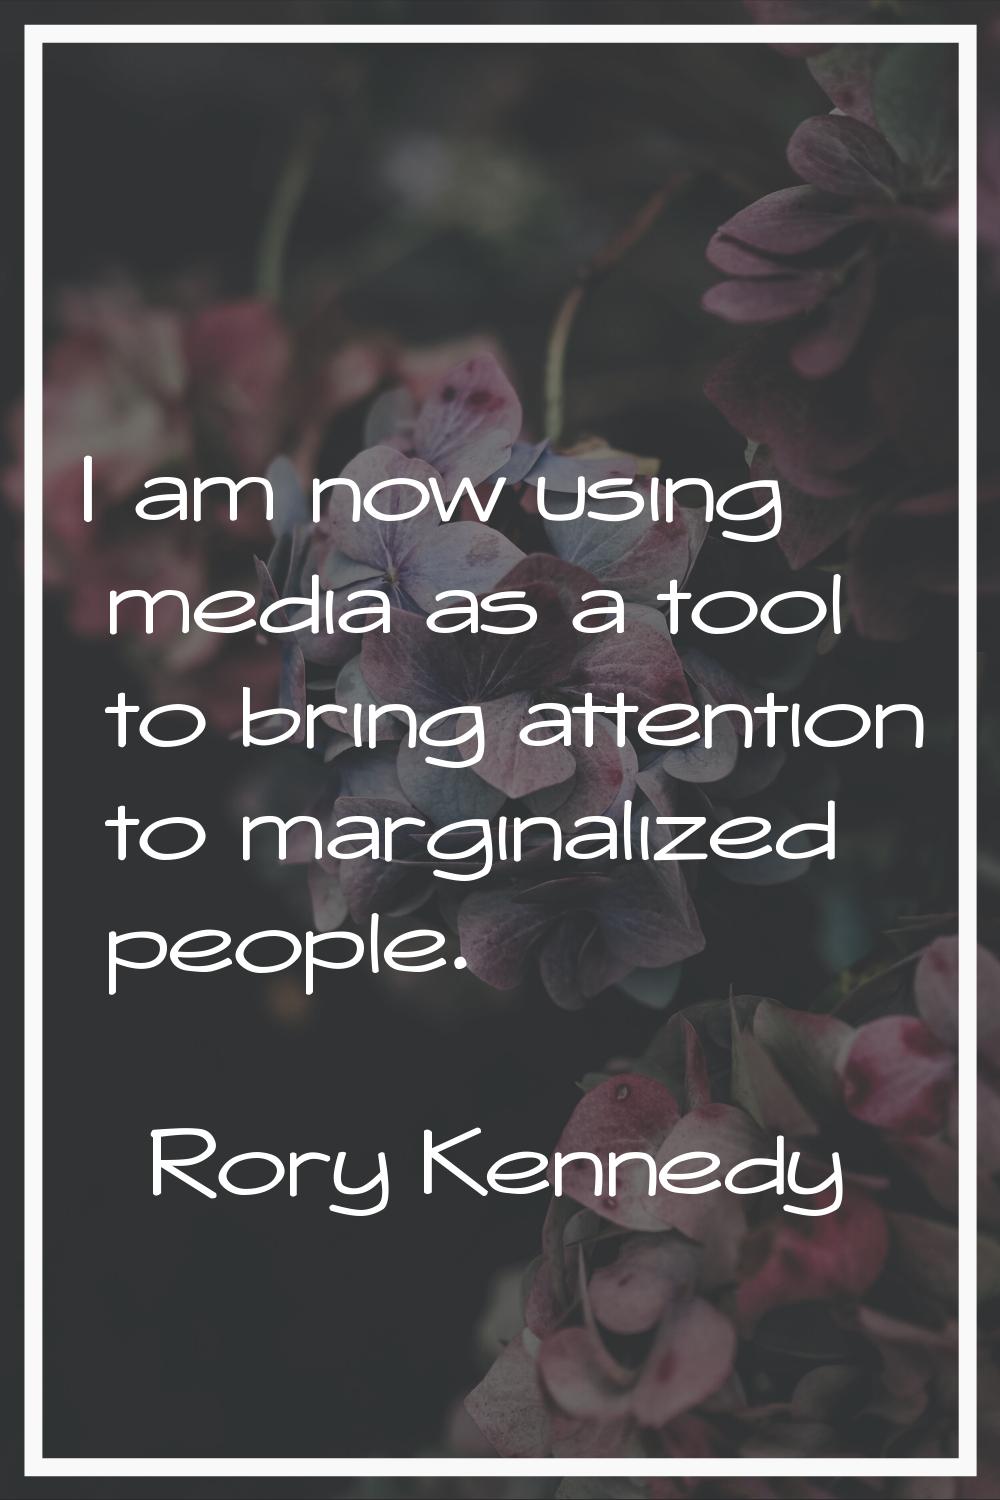 I am now using media as a tool to bring attention to marginalized people.